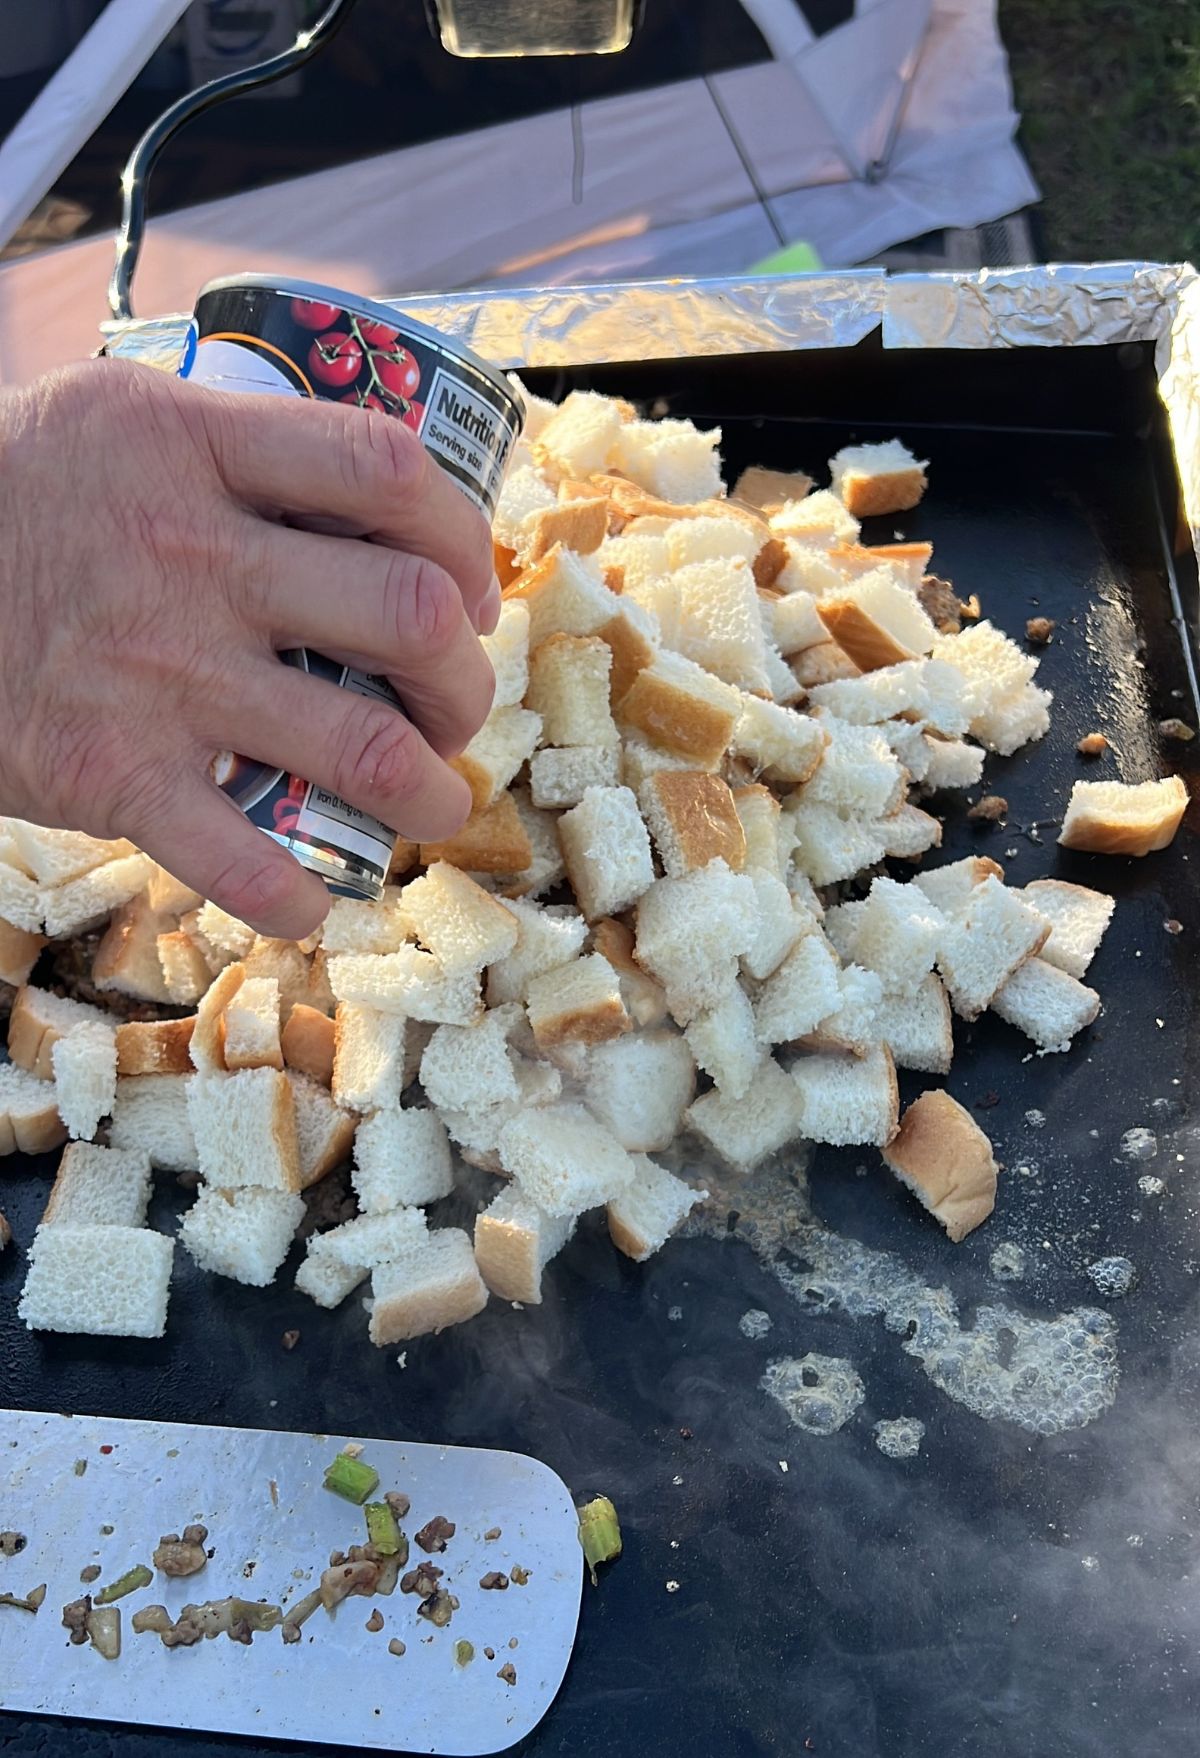 A person pouring a can onto a pan of bread cubes.